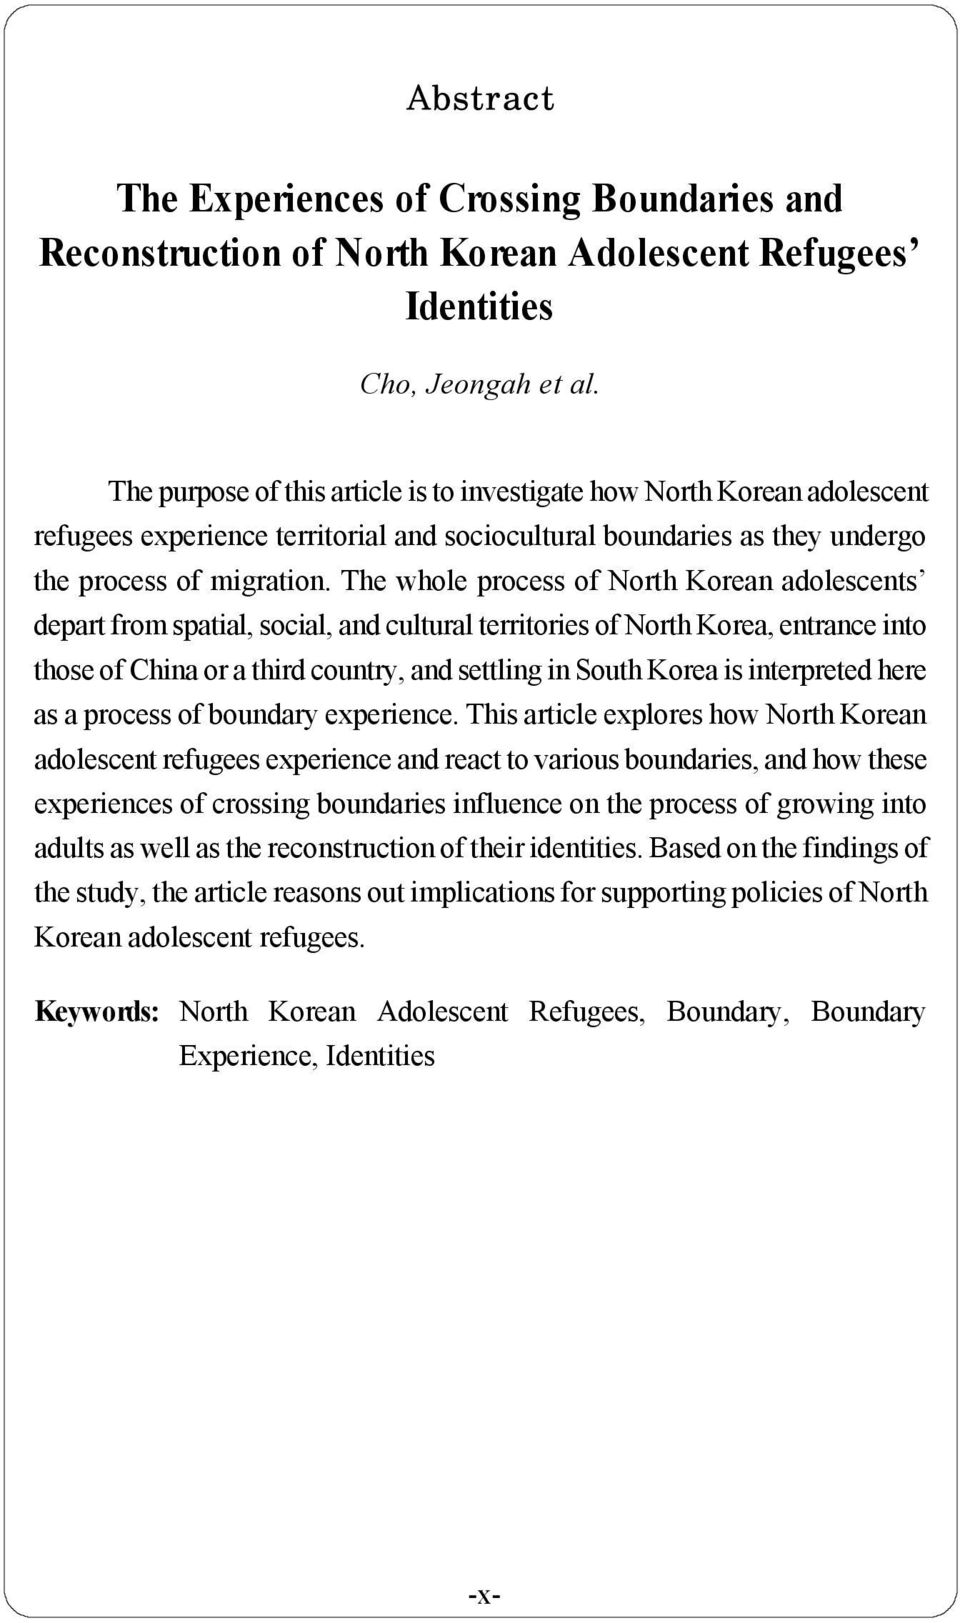 The whole process of North Korean adolescents depart from spatial, social, and cultural territories of North Korea, entrance into those of China or a third country, and settling in South Korea is